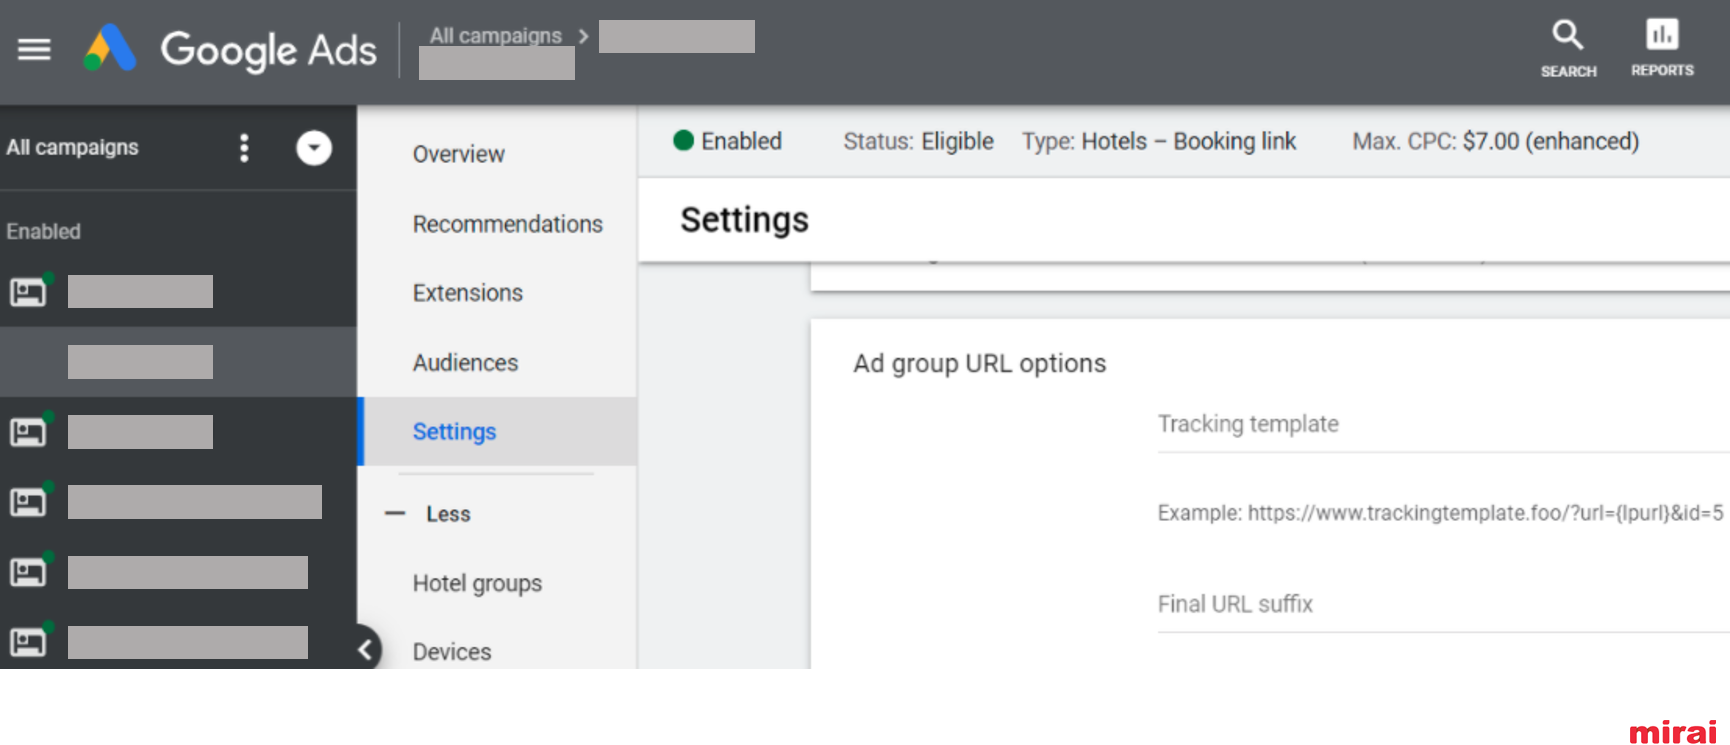 14. Monitor your performance in Google Hotel Ads - Mirai